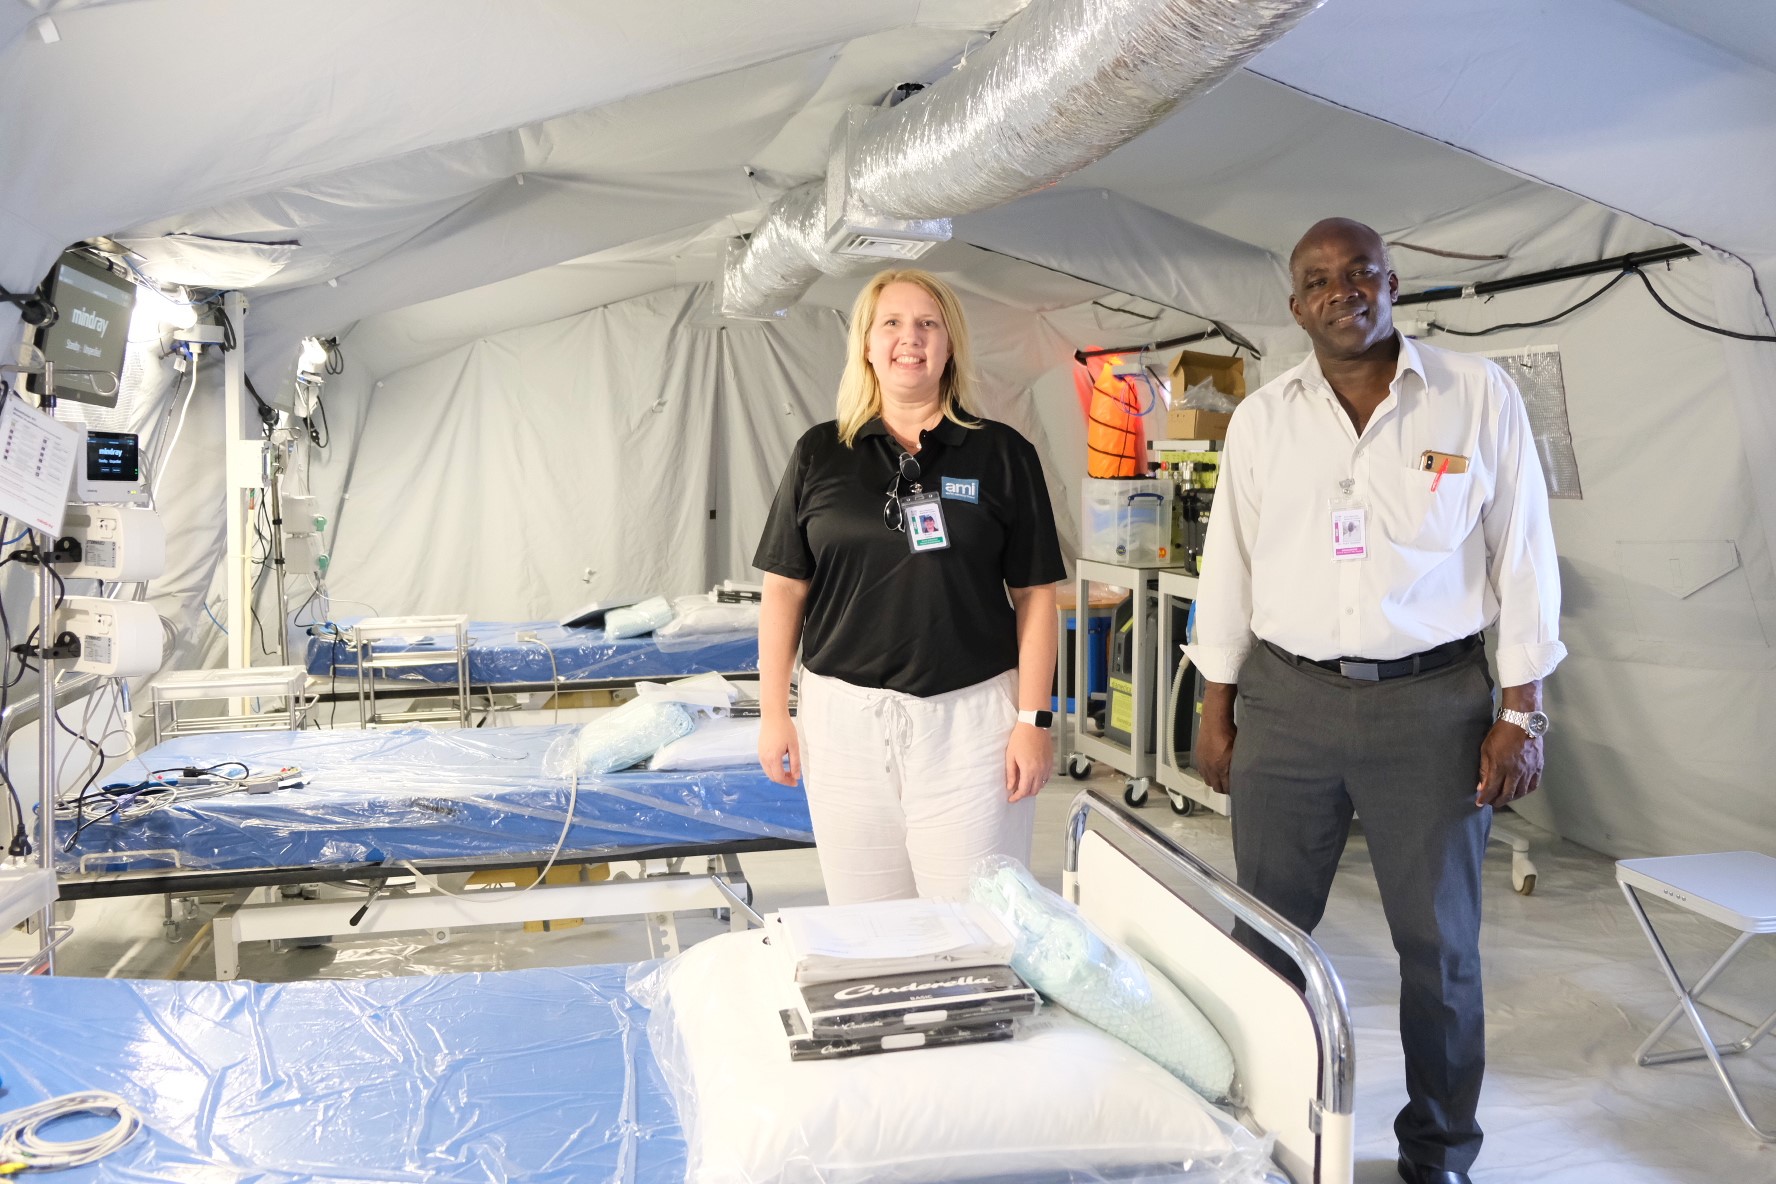 AMI medical team assists SMMC in COVID-19 response